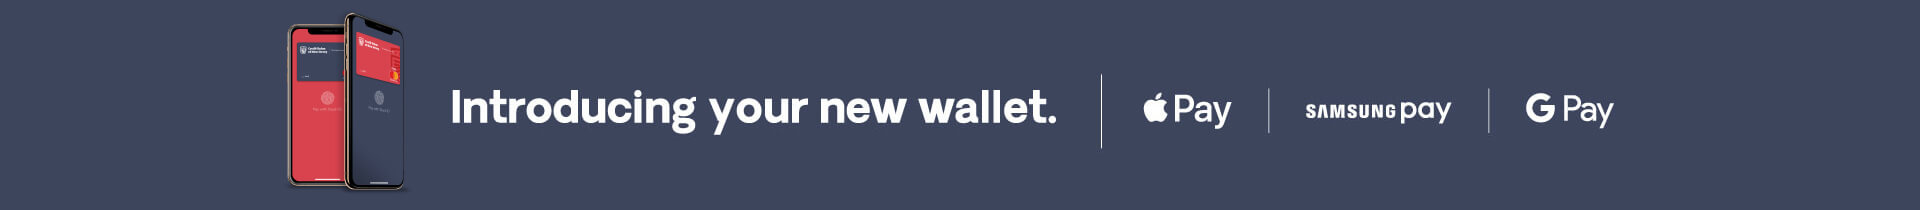 Introducing your new wallet. Apple Pay | Samsung Pay | Google Pay